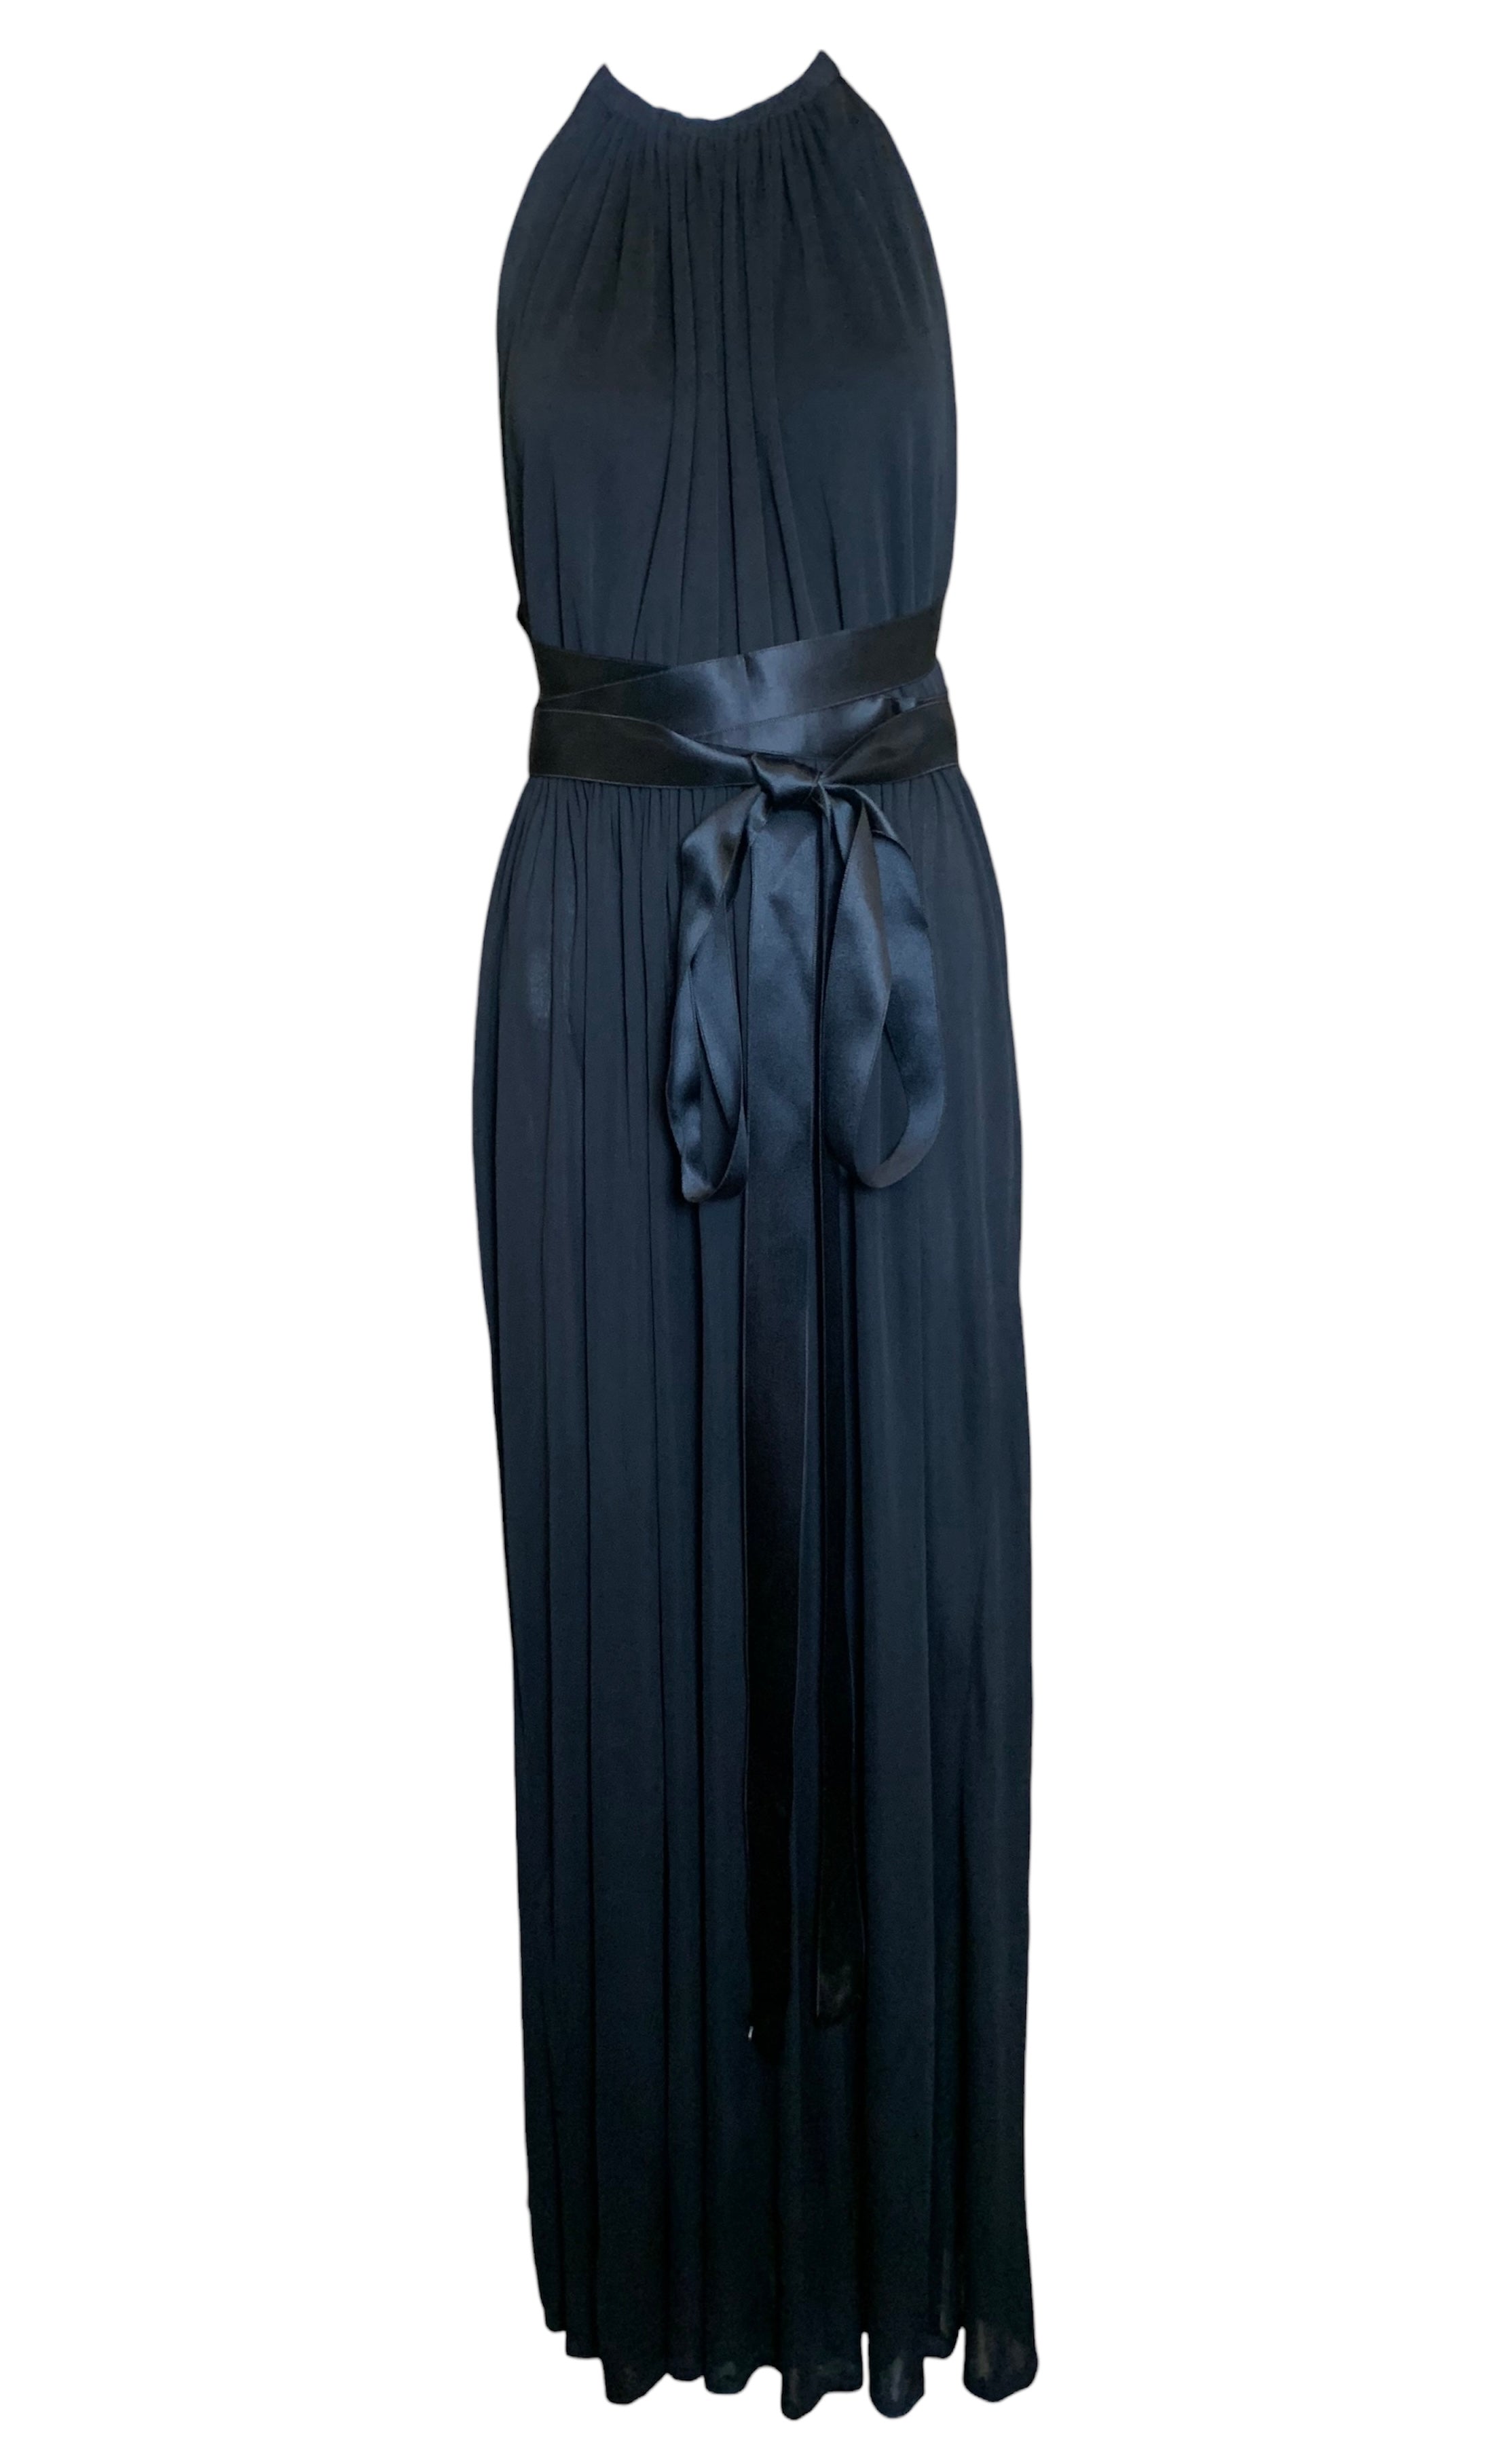 Donald Brooks '70s Black Jersey Halter Gown with Satin Ties FRONT 1/6